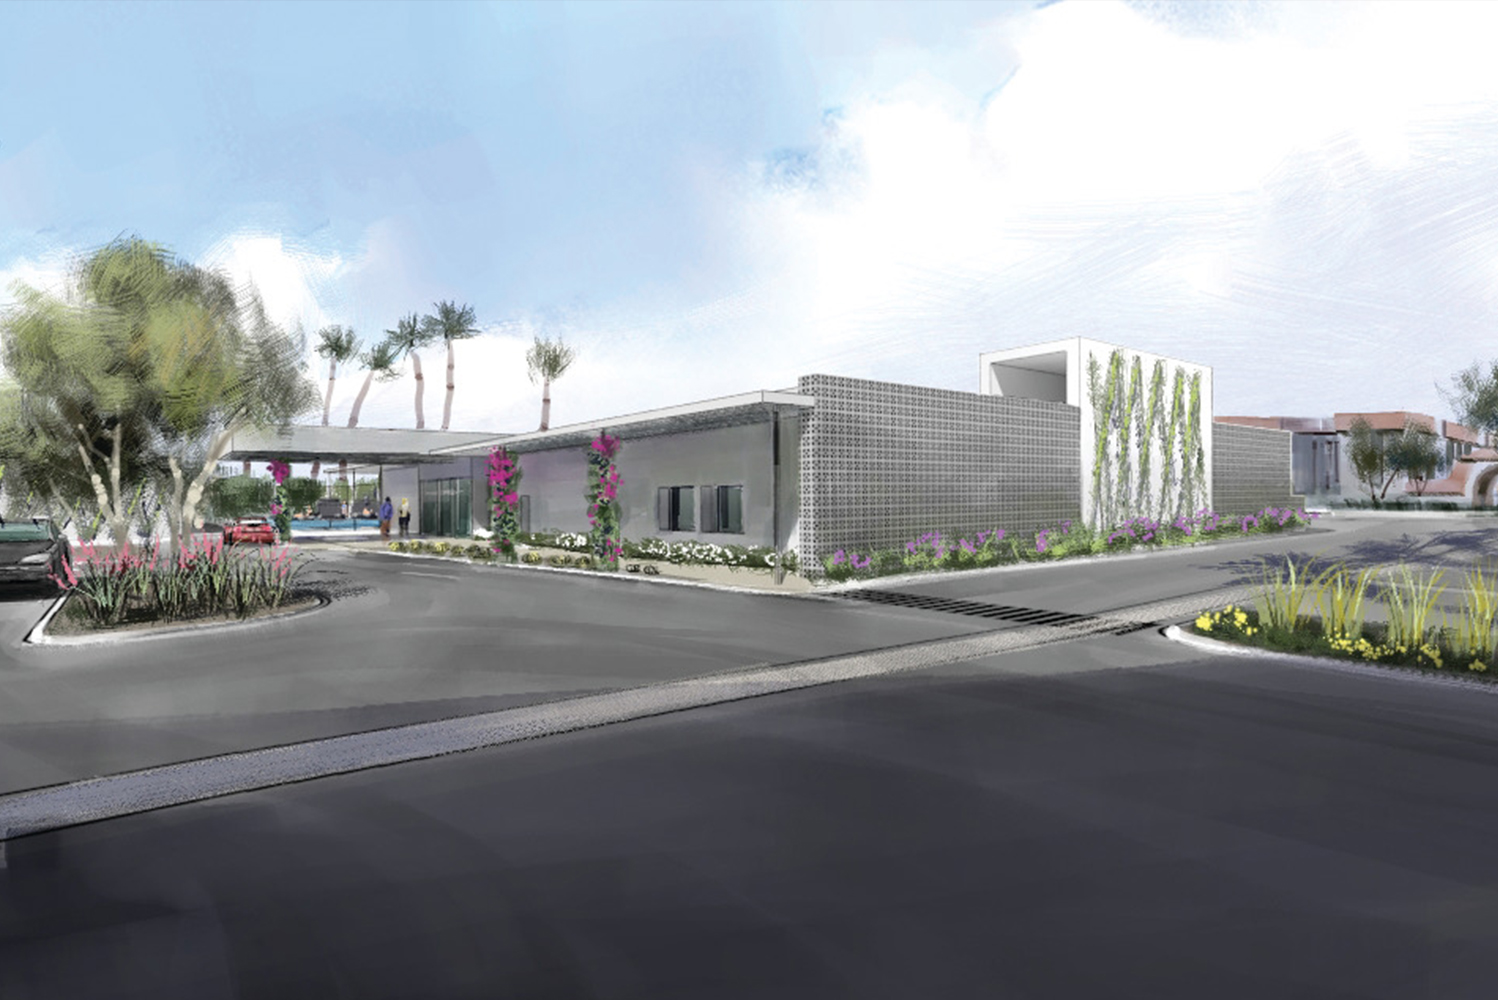 Scottsdale Inn is currently undergoing a 12 million renovation and will debut as Hotel Adeline in early 2018 